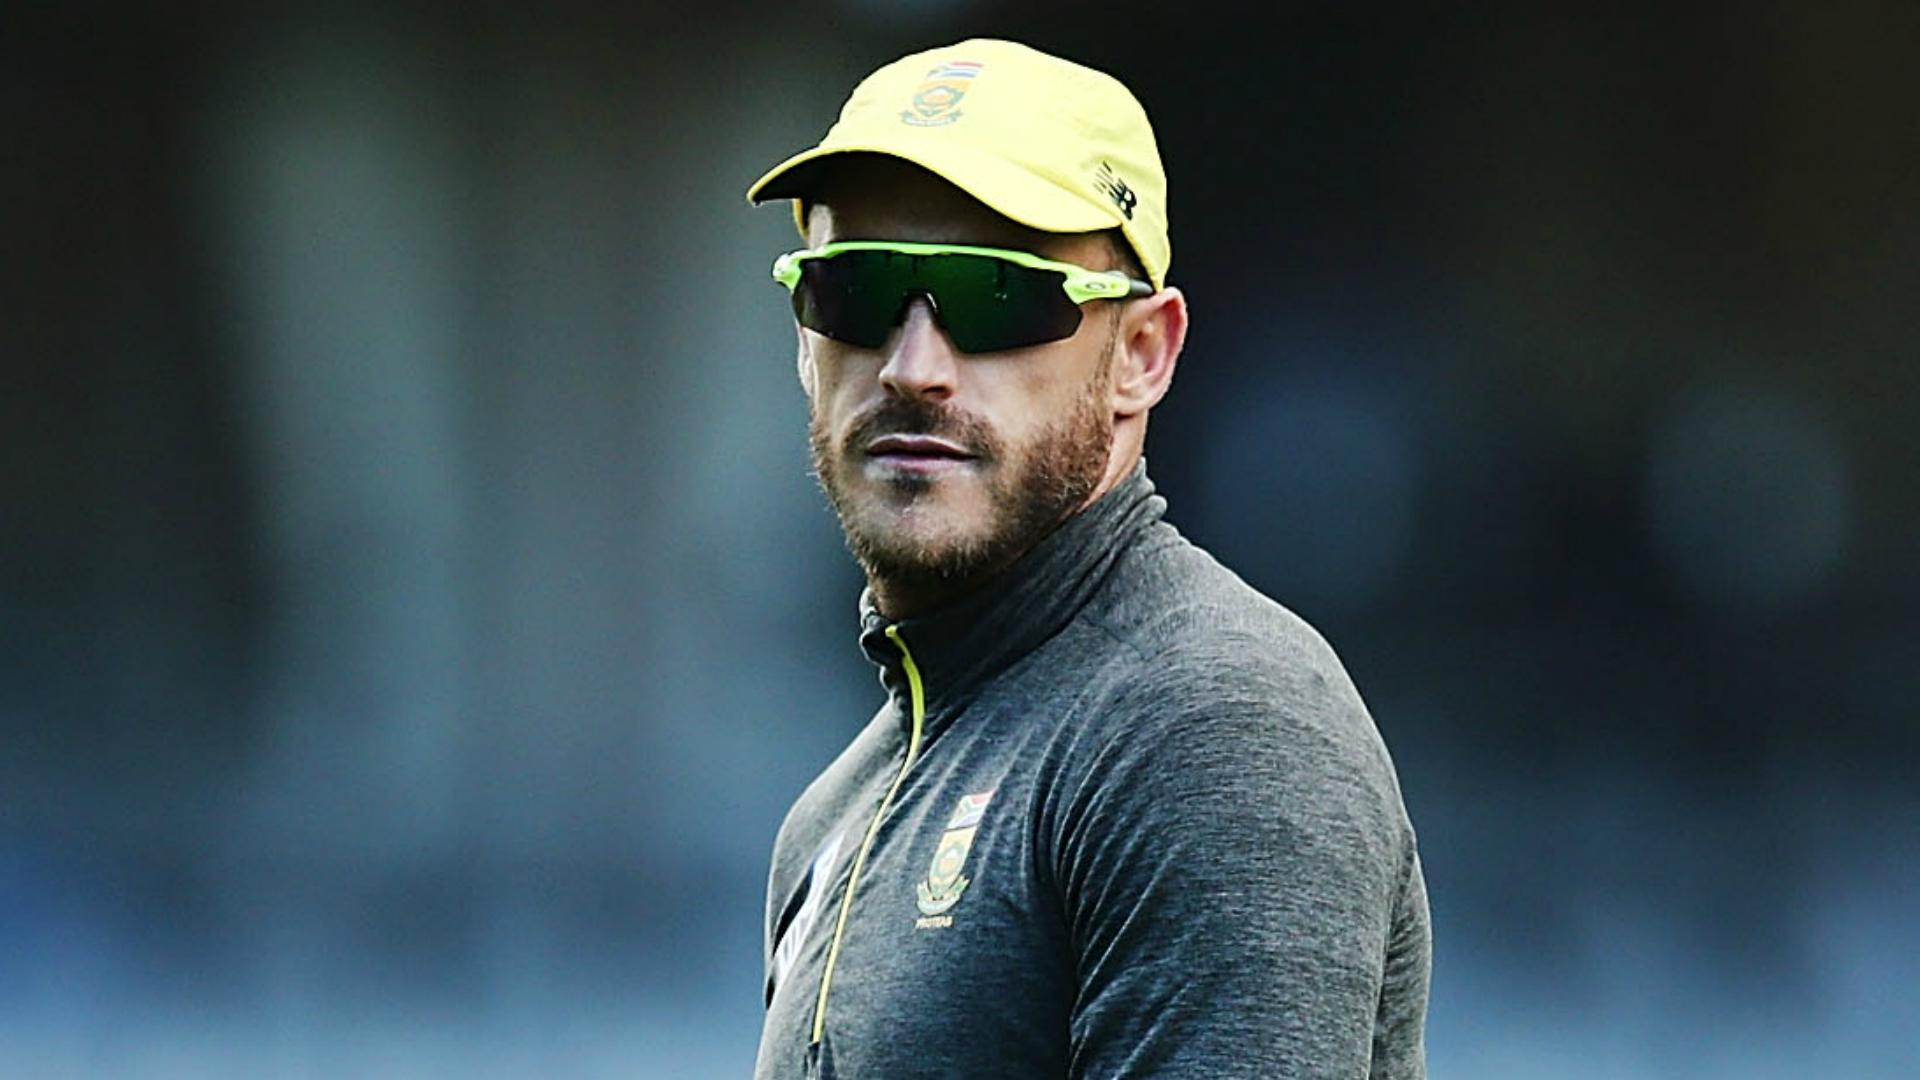 New father Du Plessis could miss Lord's Test. CRICKET News